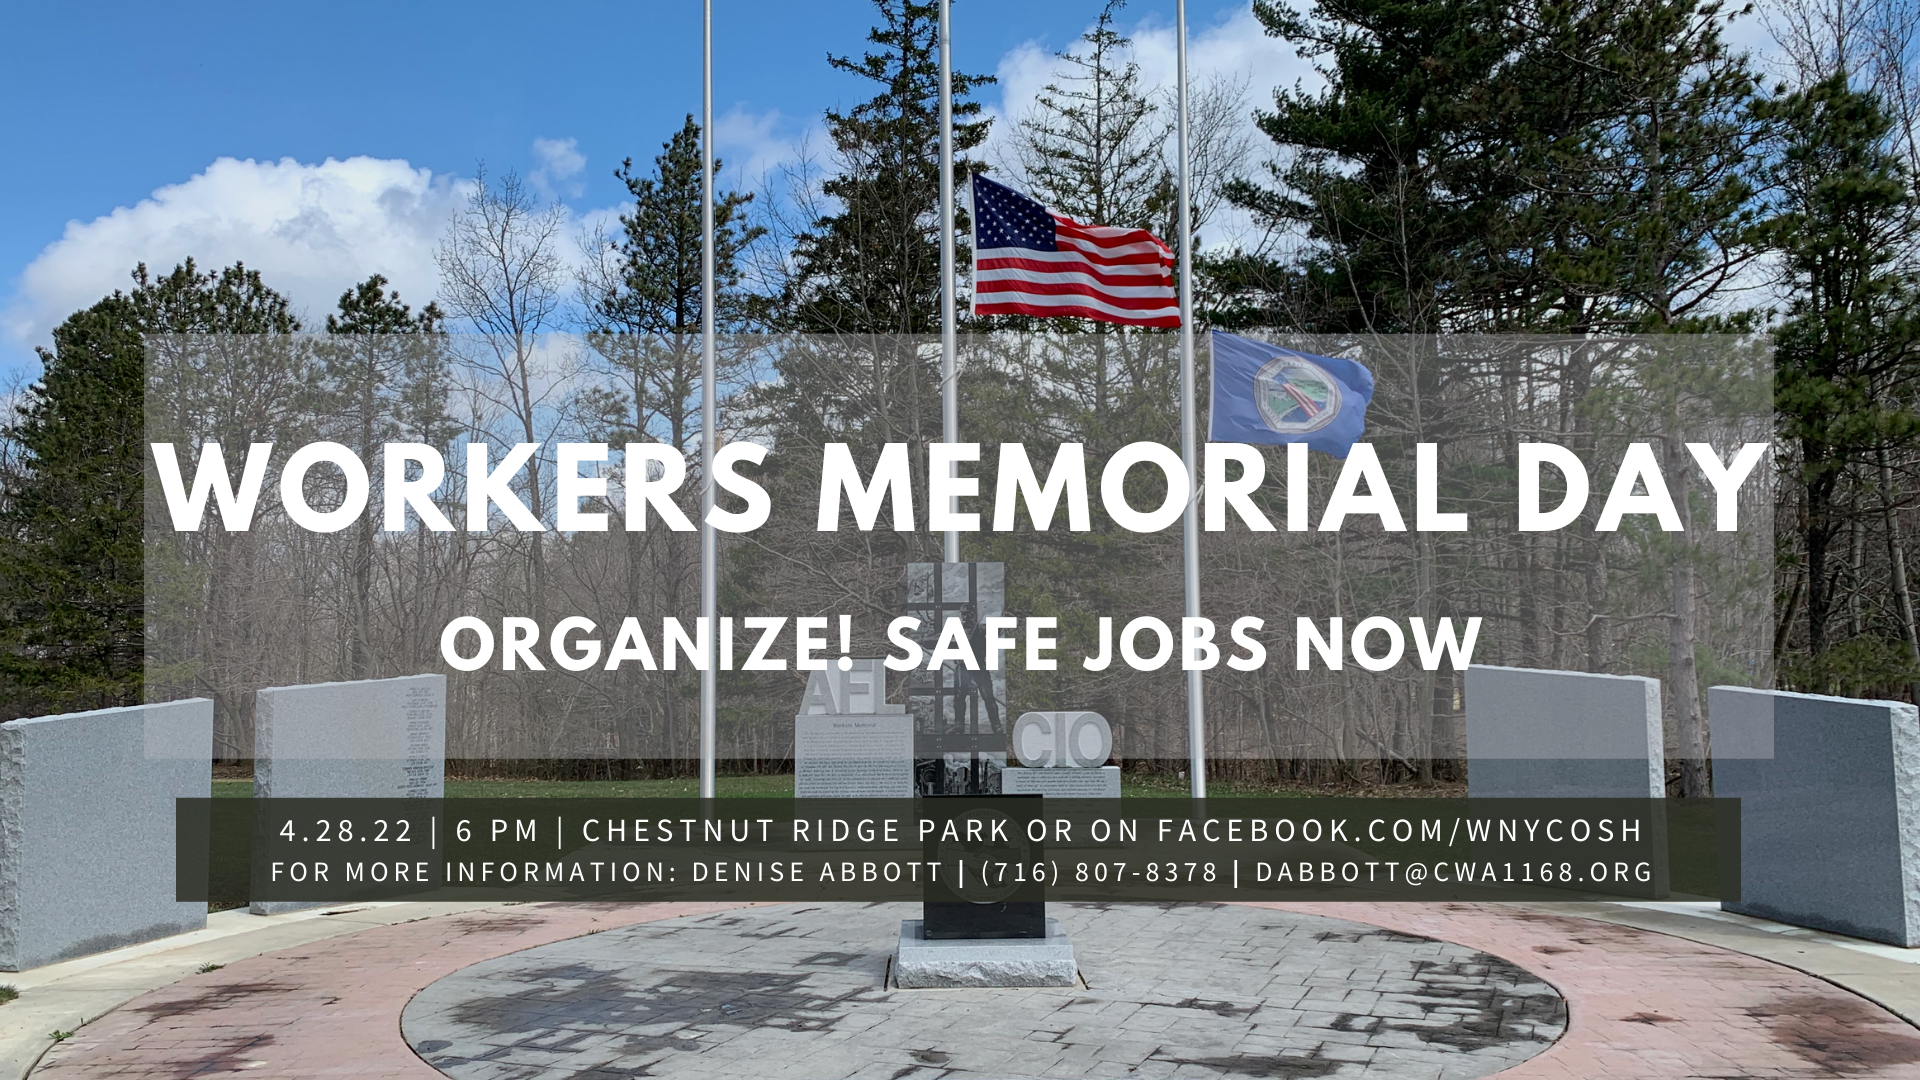 Announcement for Worker Memorial Day 2022. Background image is of a memorial in Chestnut Ridge Park.